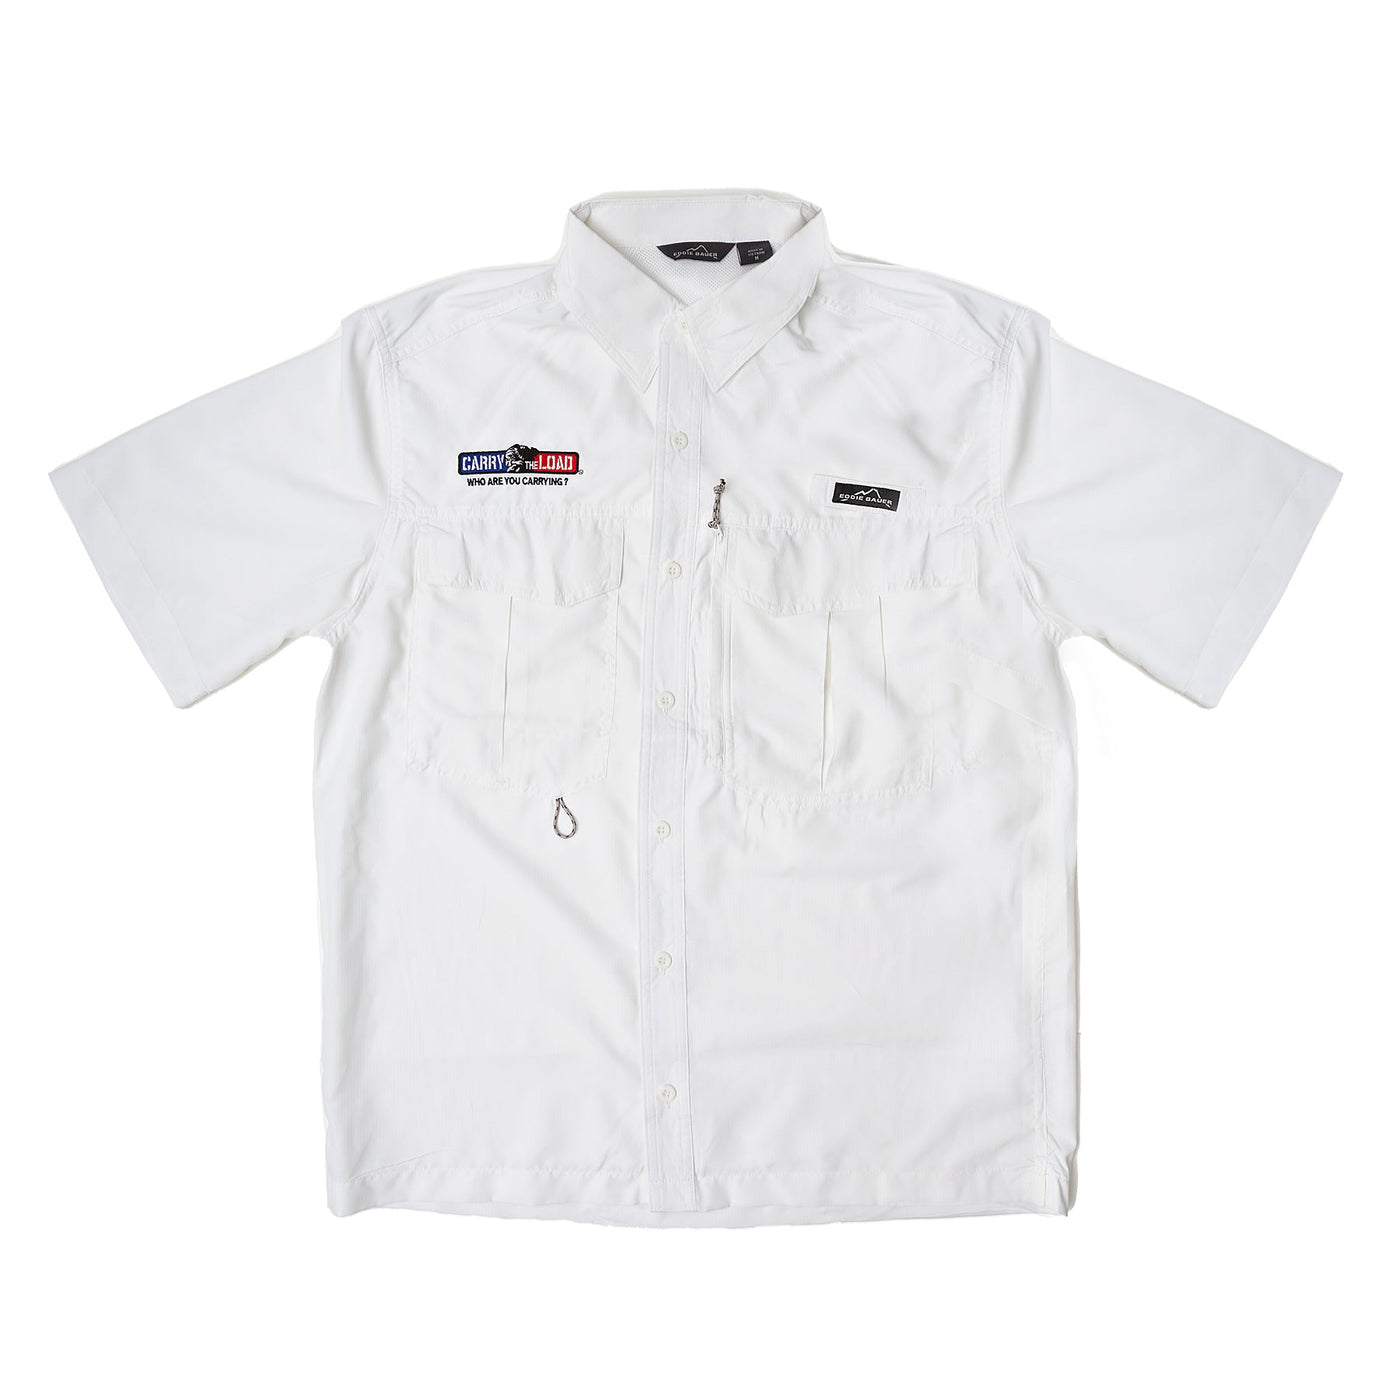 Eddie Bauer Performance Fishing Shirt-White - Carry The Load Shop